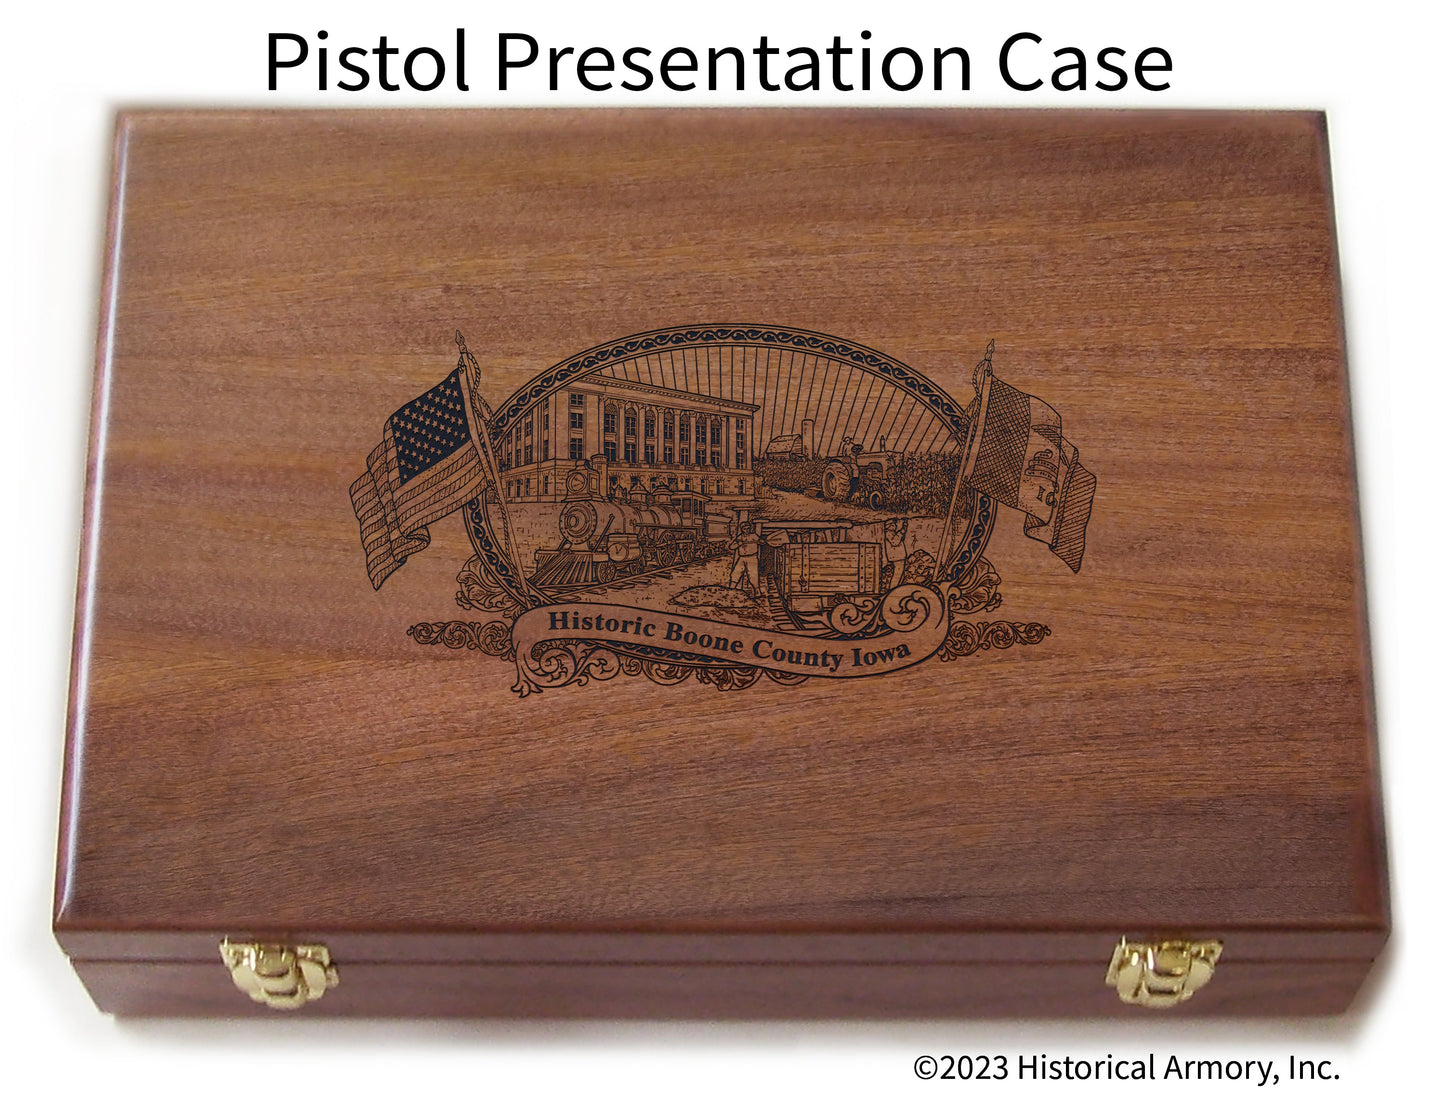 Boone County Iowa Engraved .45 Auto Ruger 1911 Presentation Case